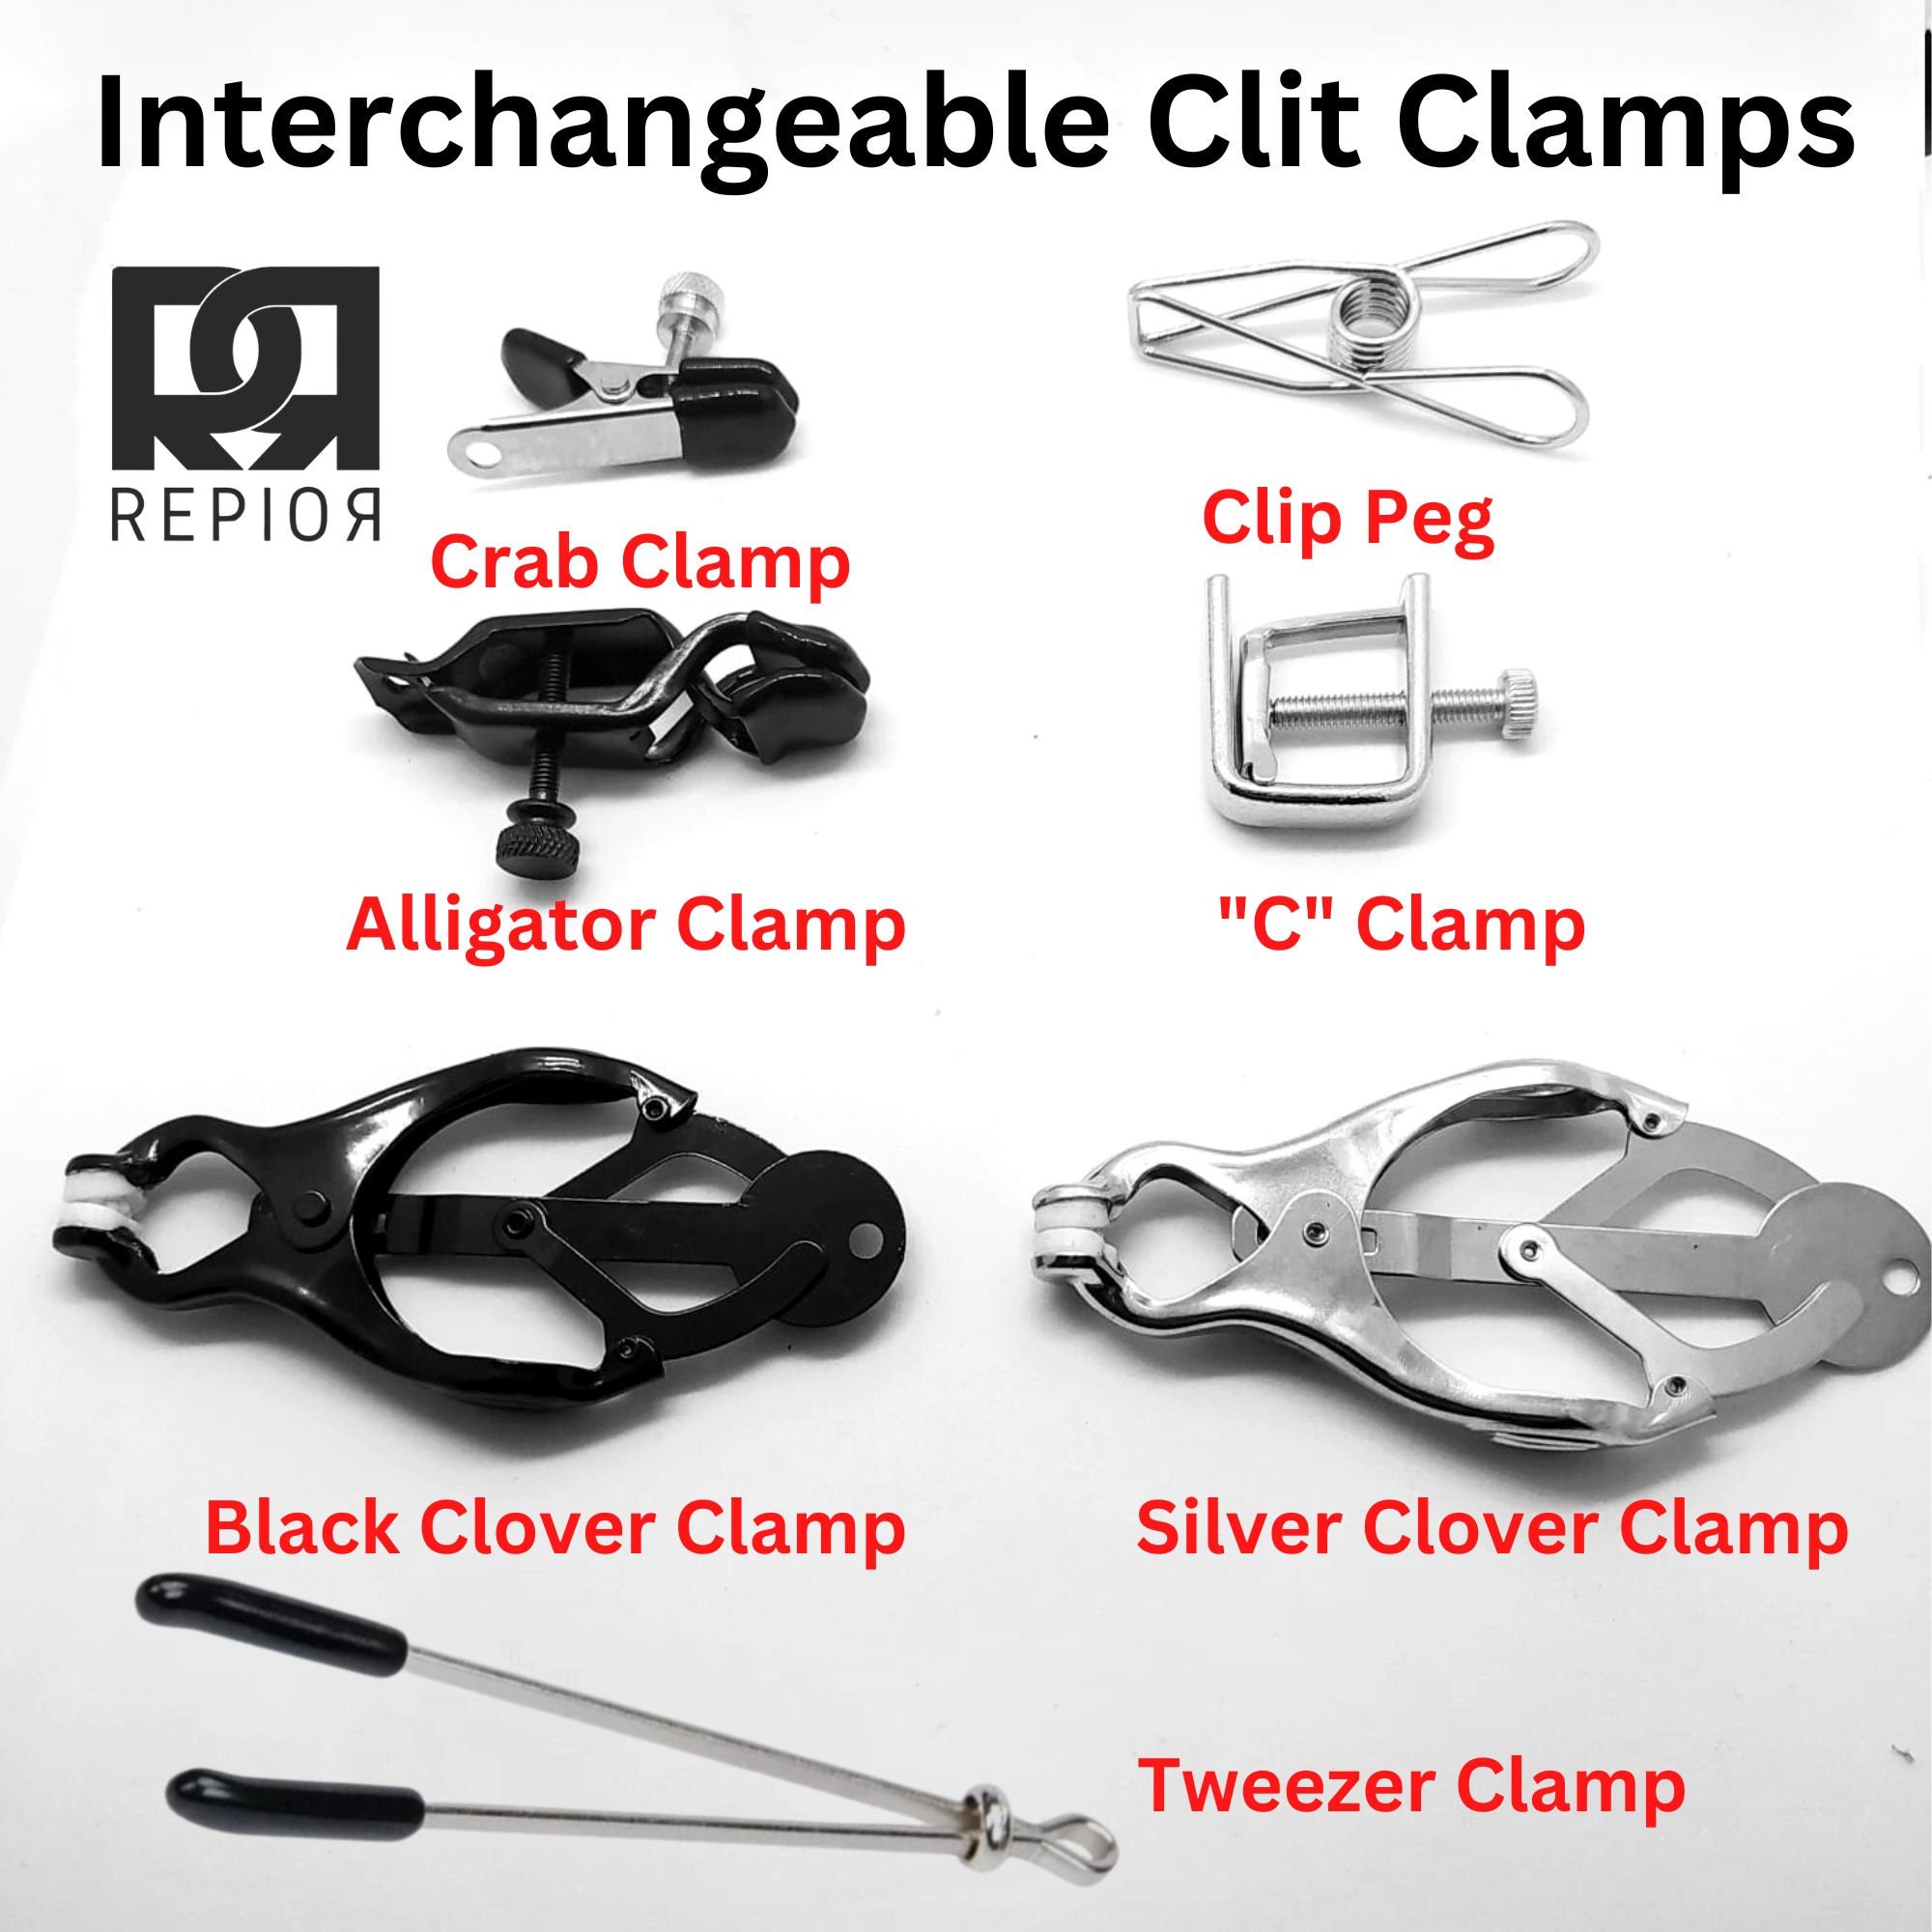 how do clit clamps work